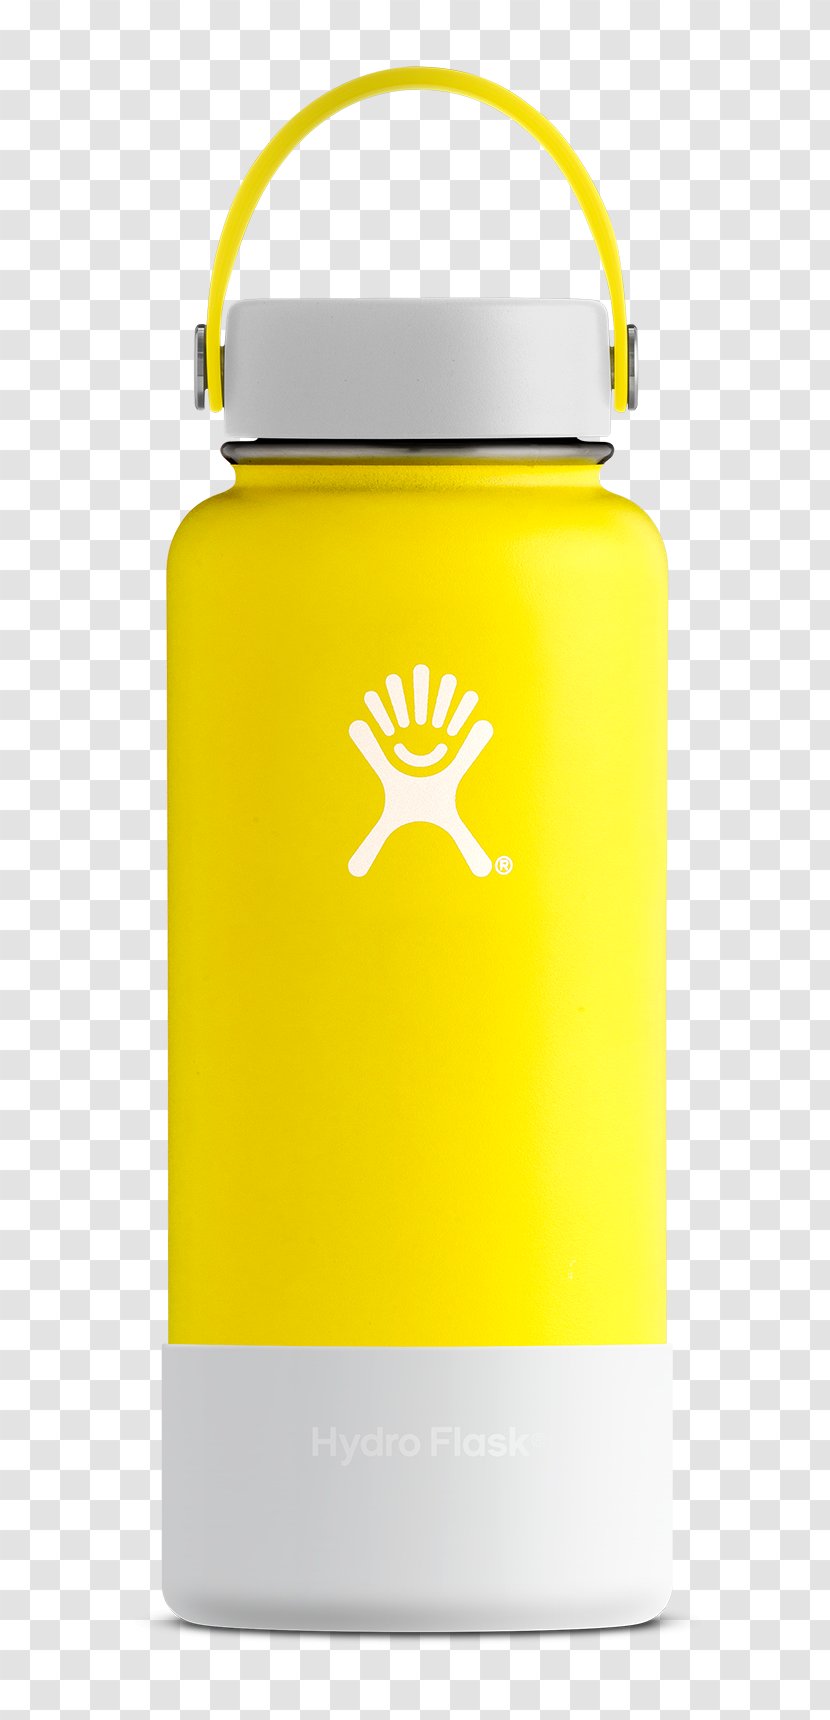 Water Bottles Imperial Pint Ounce Milliliter Kiwifruit - Pound - All Hydro Flask Colors Transparent PNG